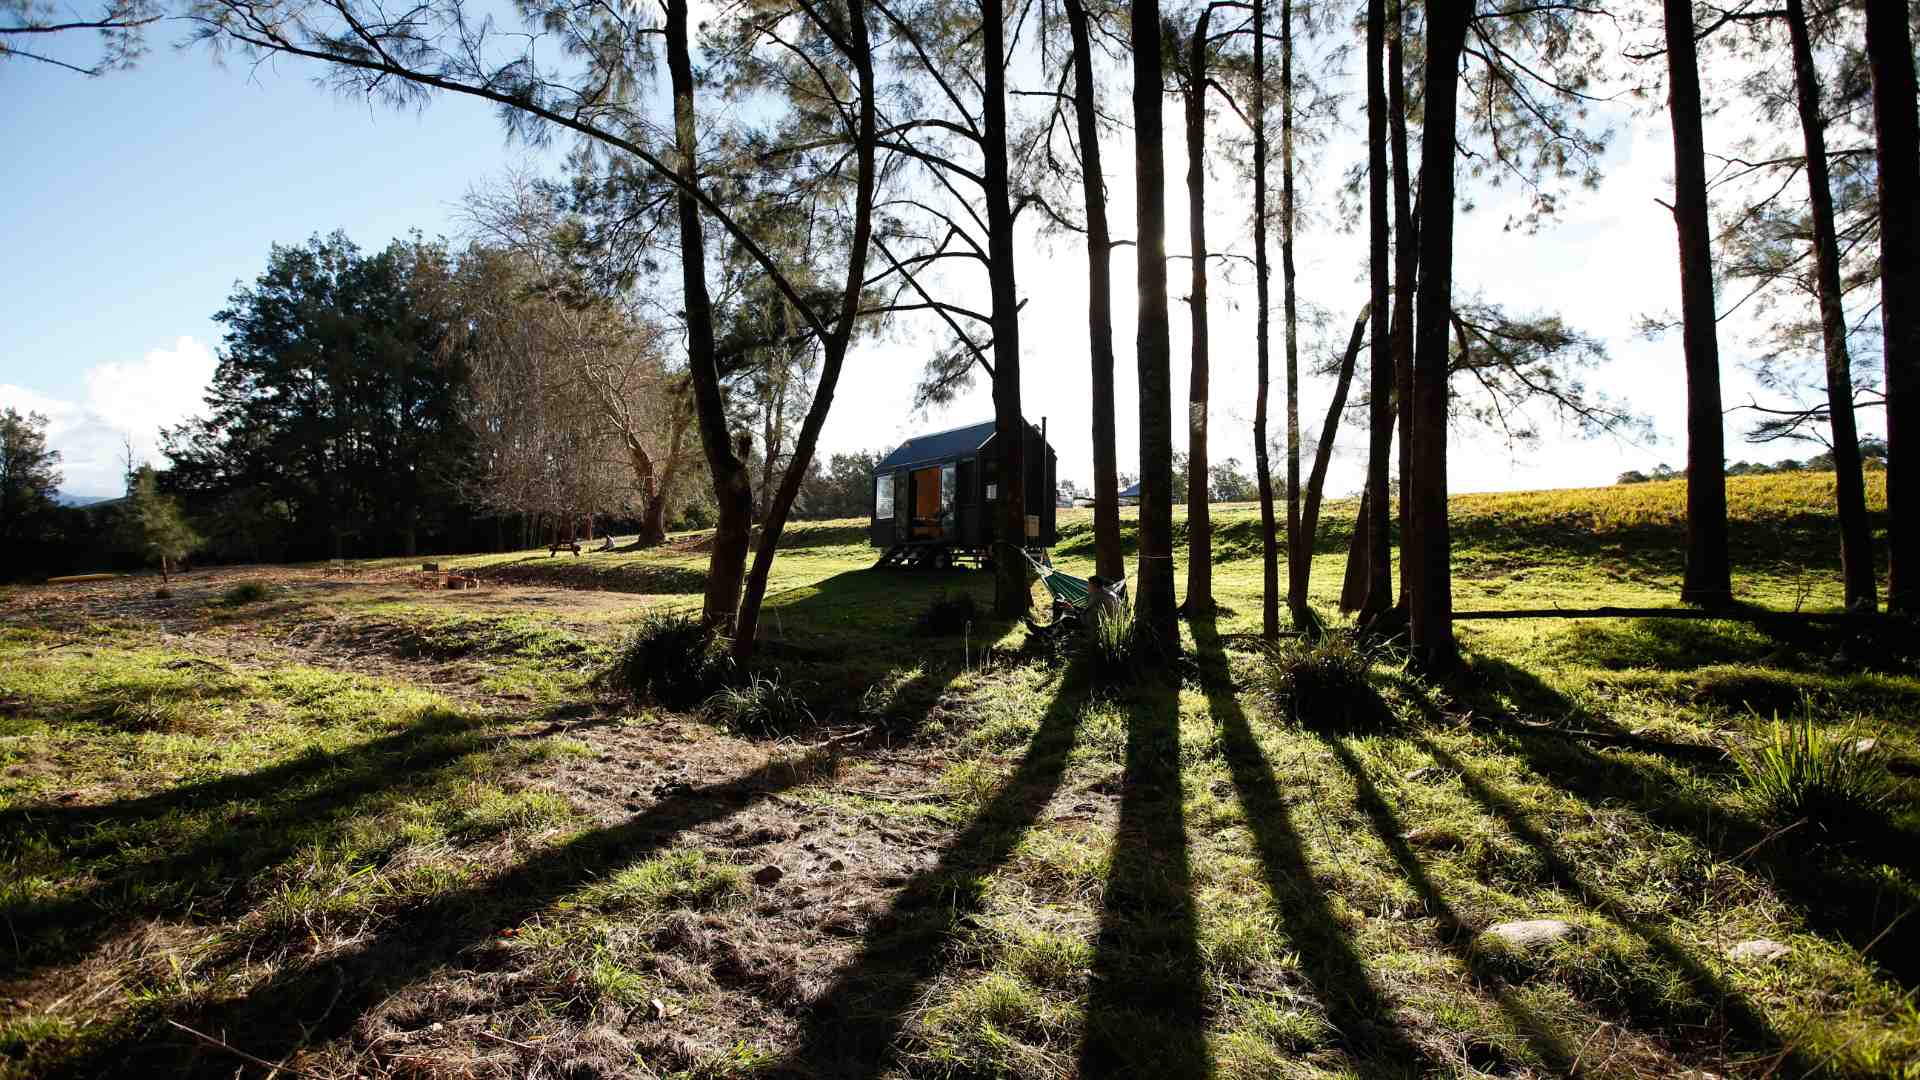 You Can Now Book This Tiny Off-Grid Cabin in the Bush for Your Next Spring Getaway